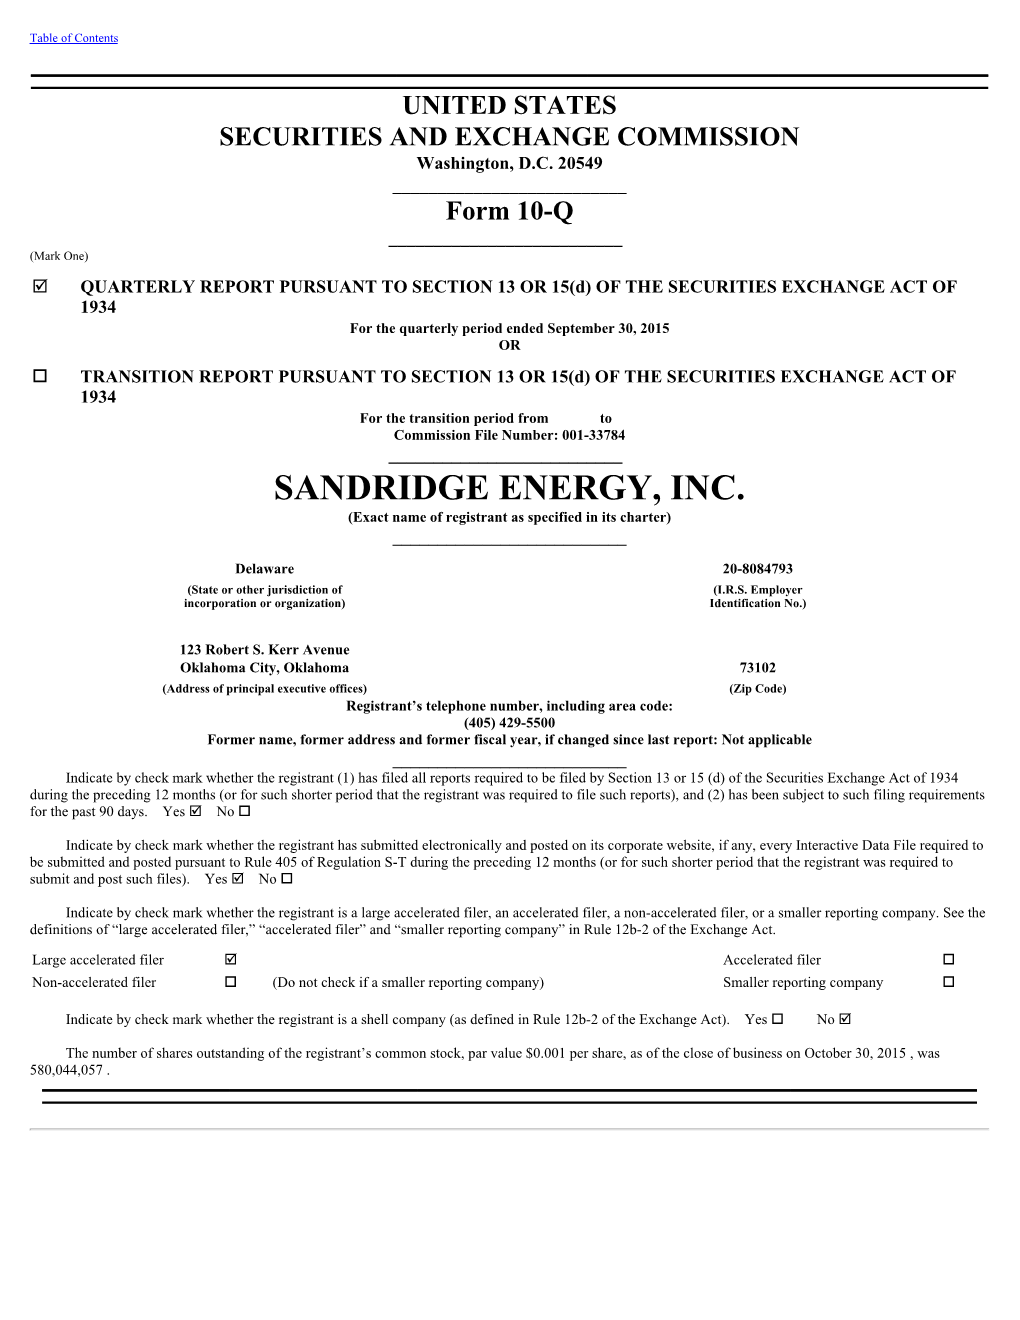 SANDRIDGE ENERGY, INC. (Exact Name of Registrant As Specified in Its Charter) ______